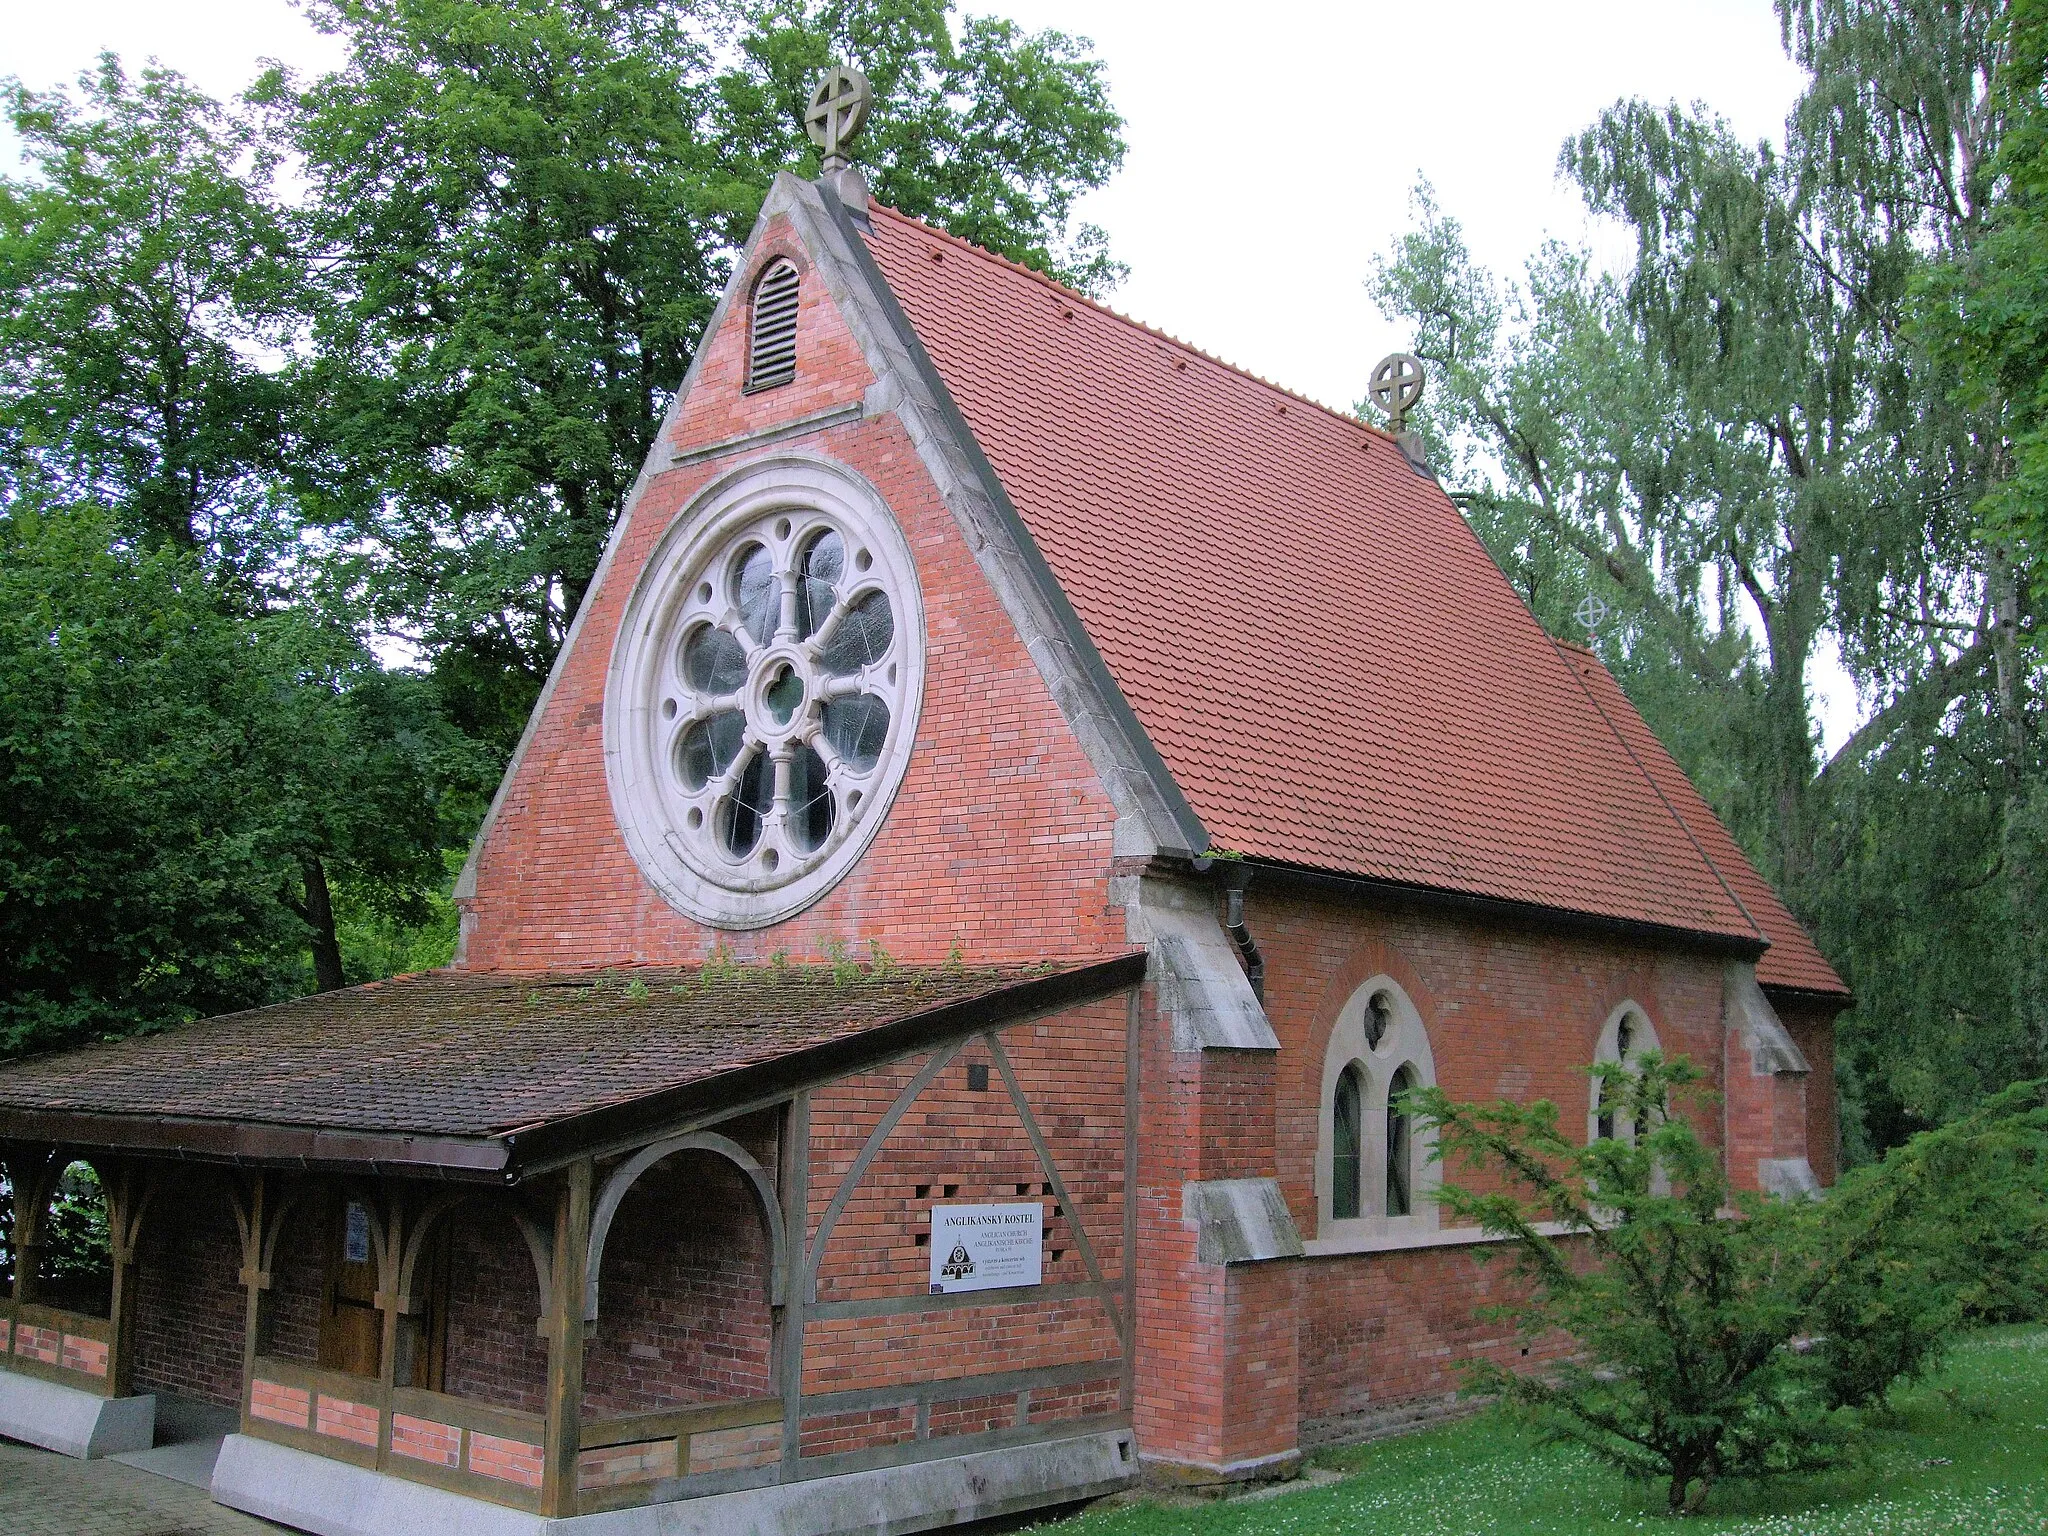 Photo showing: Former Anglican church in Mariánské Lázně, Cheb District, Czech Republic. The old red brick Anglican church in the Czech spa town of Mariánské Lázne (formerly known as Marienbad) is still standing. There was a time when Marienbad cut a dash on the royal tourism circuit. The English king, Edward VII, was a regular visitor and came to church here. It has been a while though since any services were celebrated in Marienbad's old Anglican chapel. Today the building is used as a gallery.